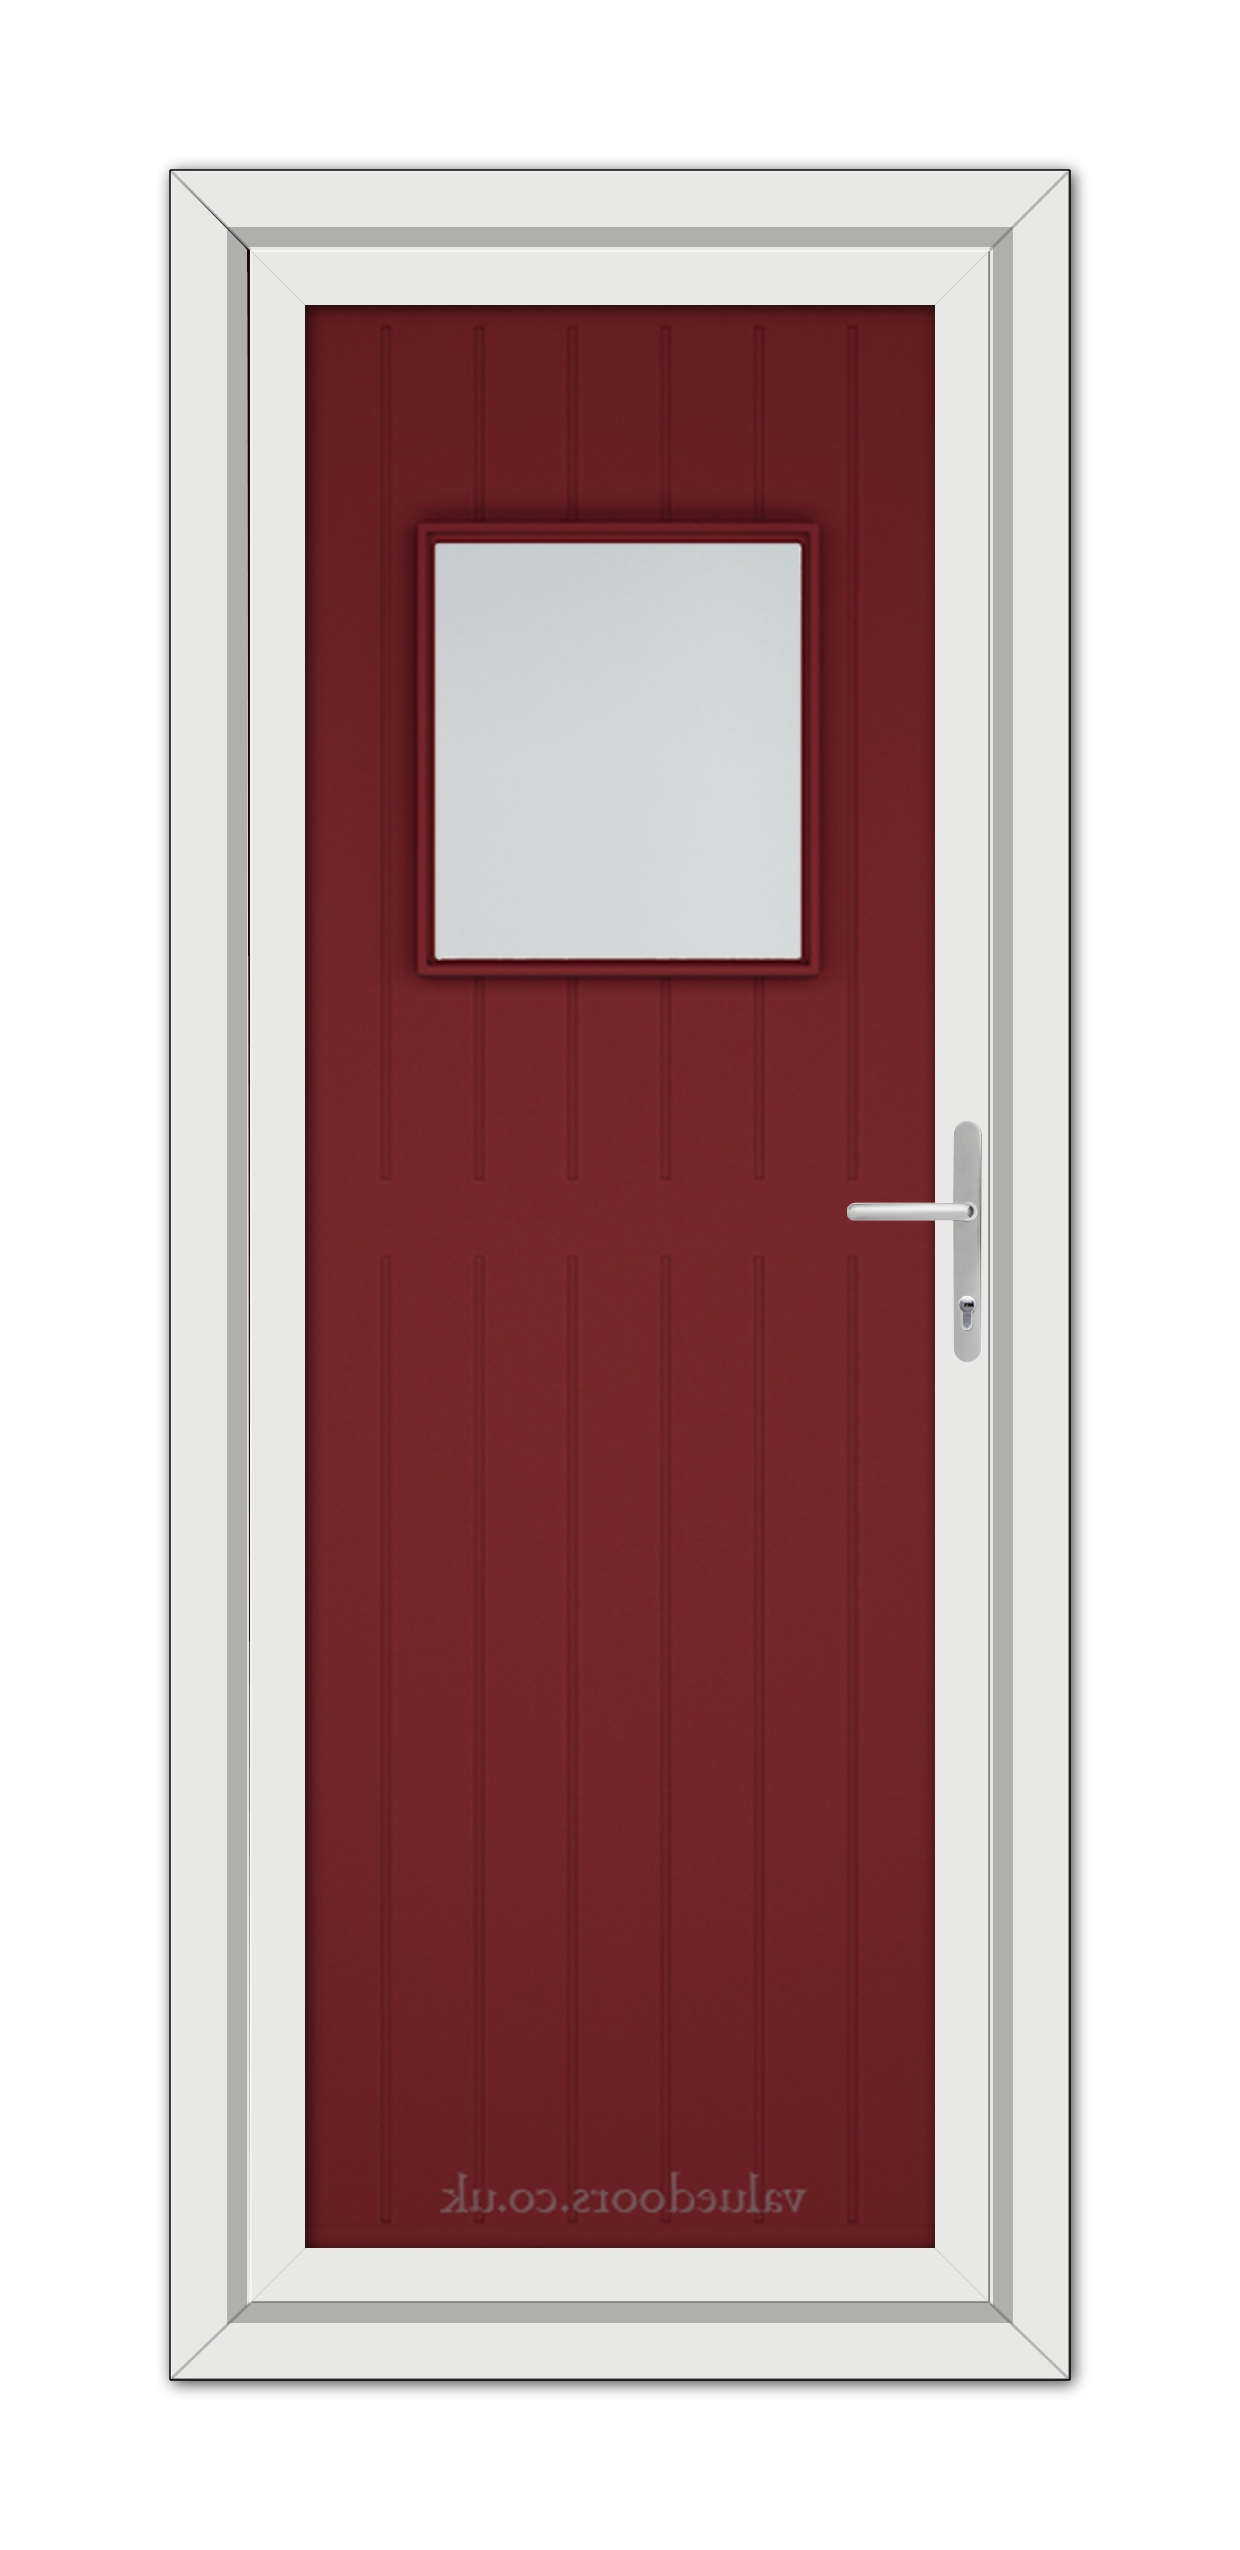 A Red Chatsworth uPVC Door with a white frame.